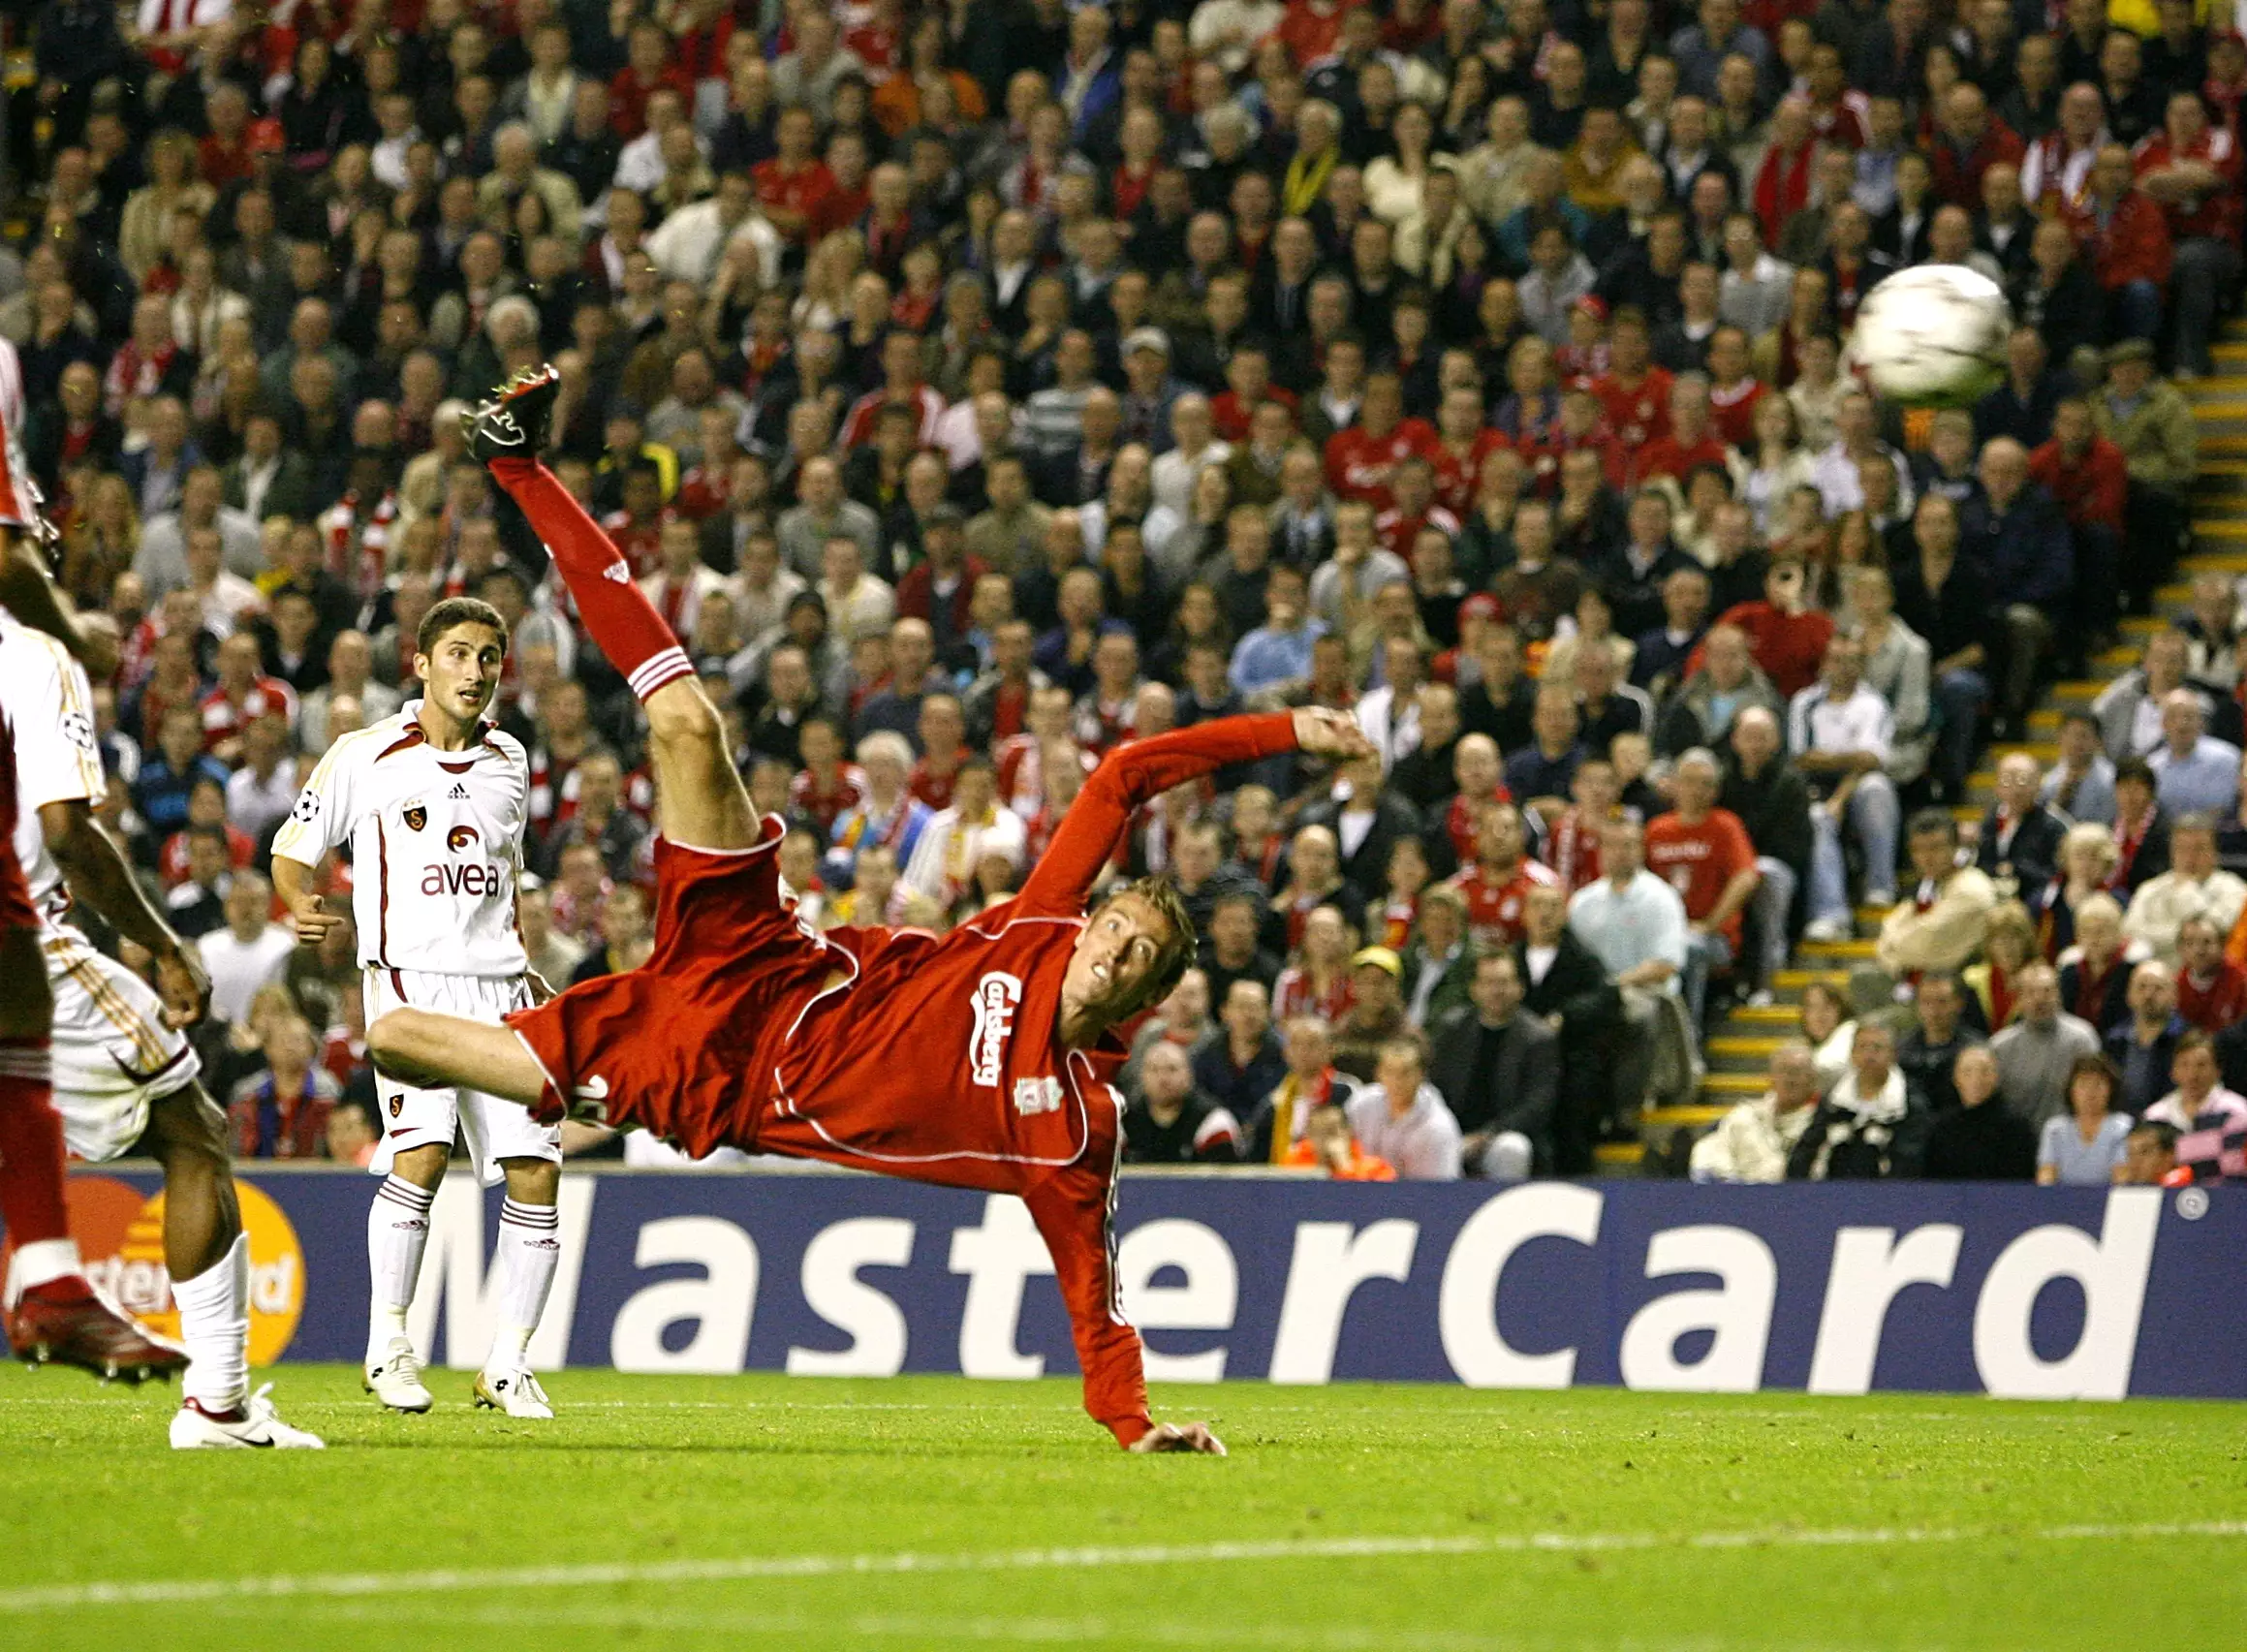 Peter Crouch scored a stunning overhead kick against Galatasaray in the Champions League